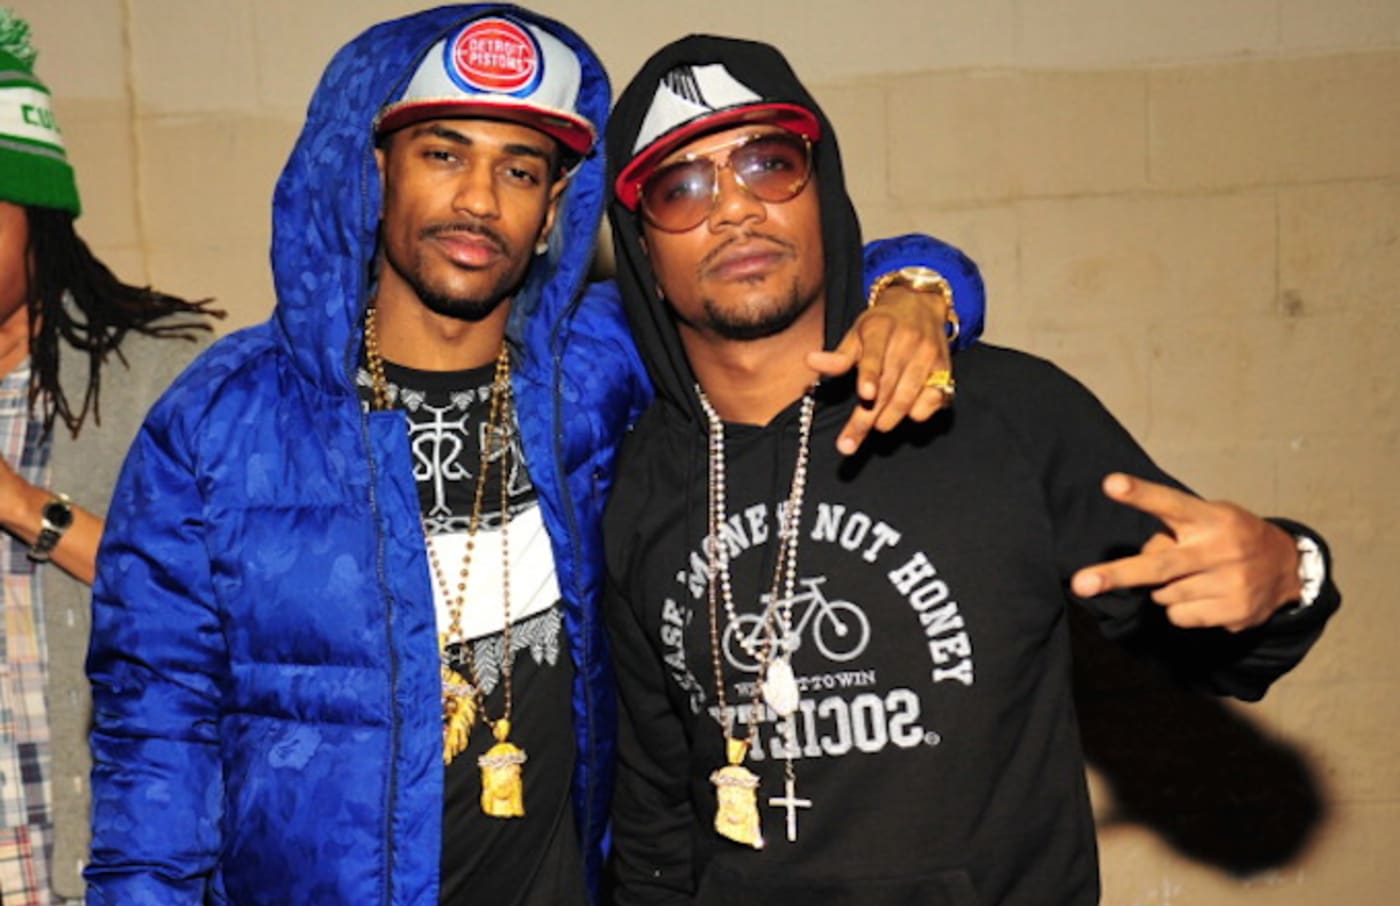 Big Sean and Cyhi the Prynce attend the after party at the Velvet Room